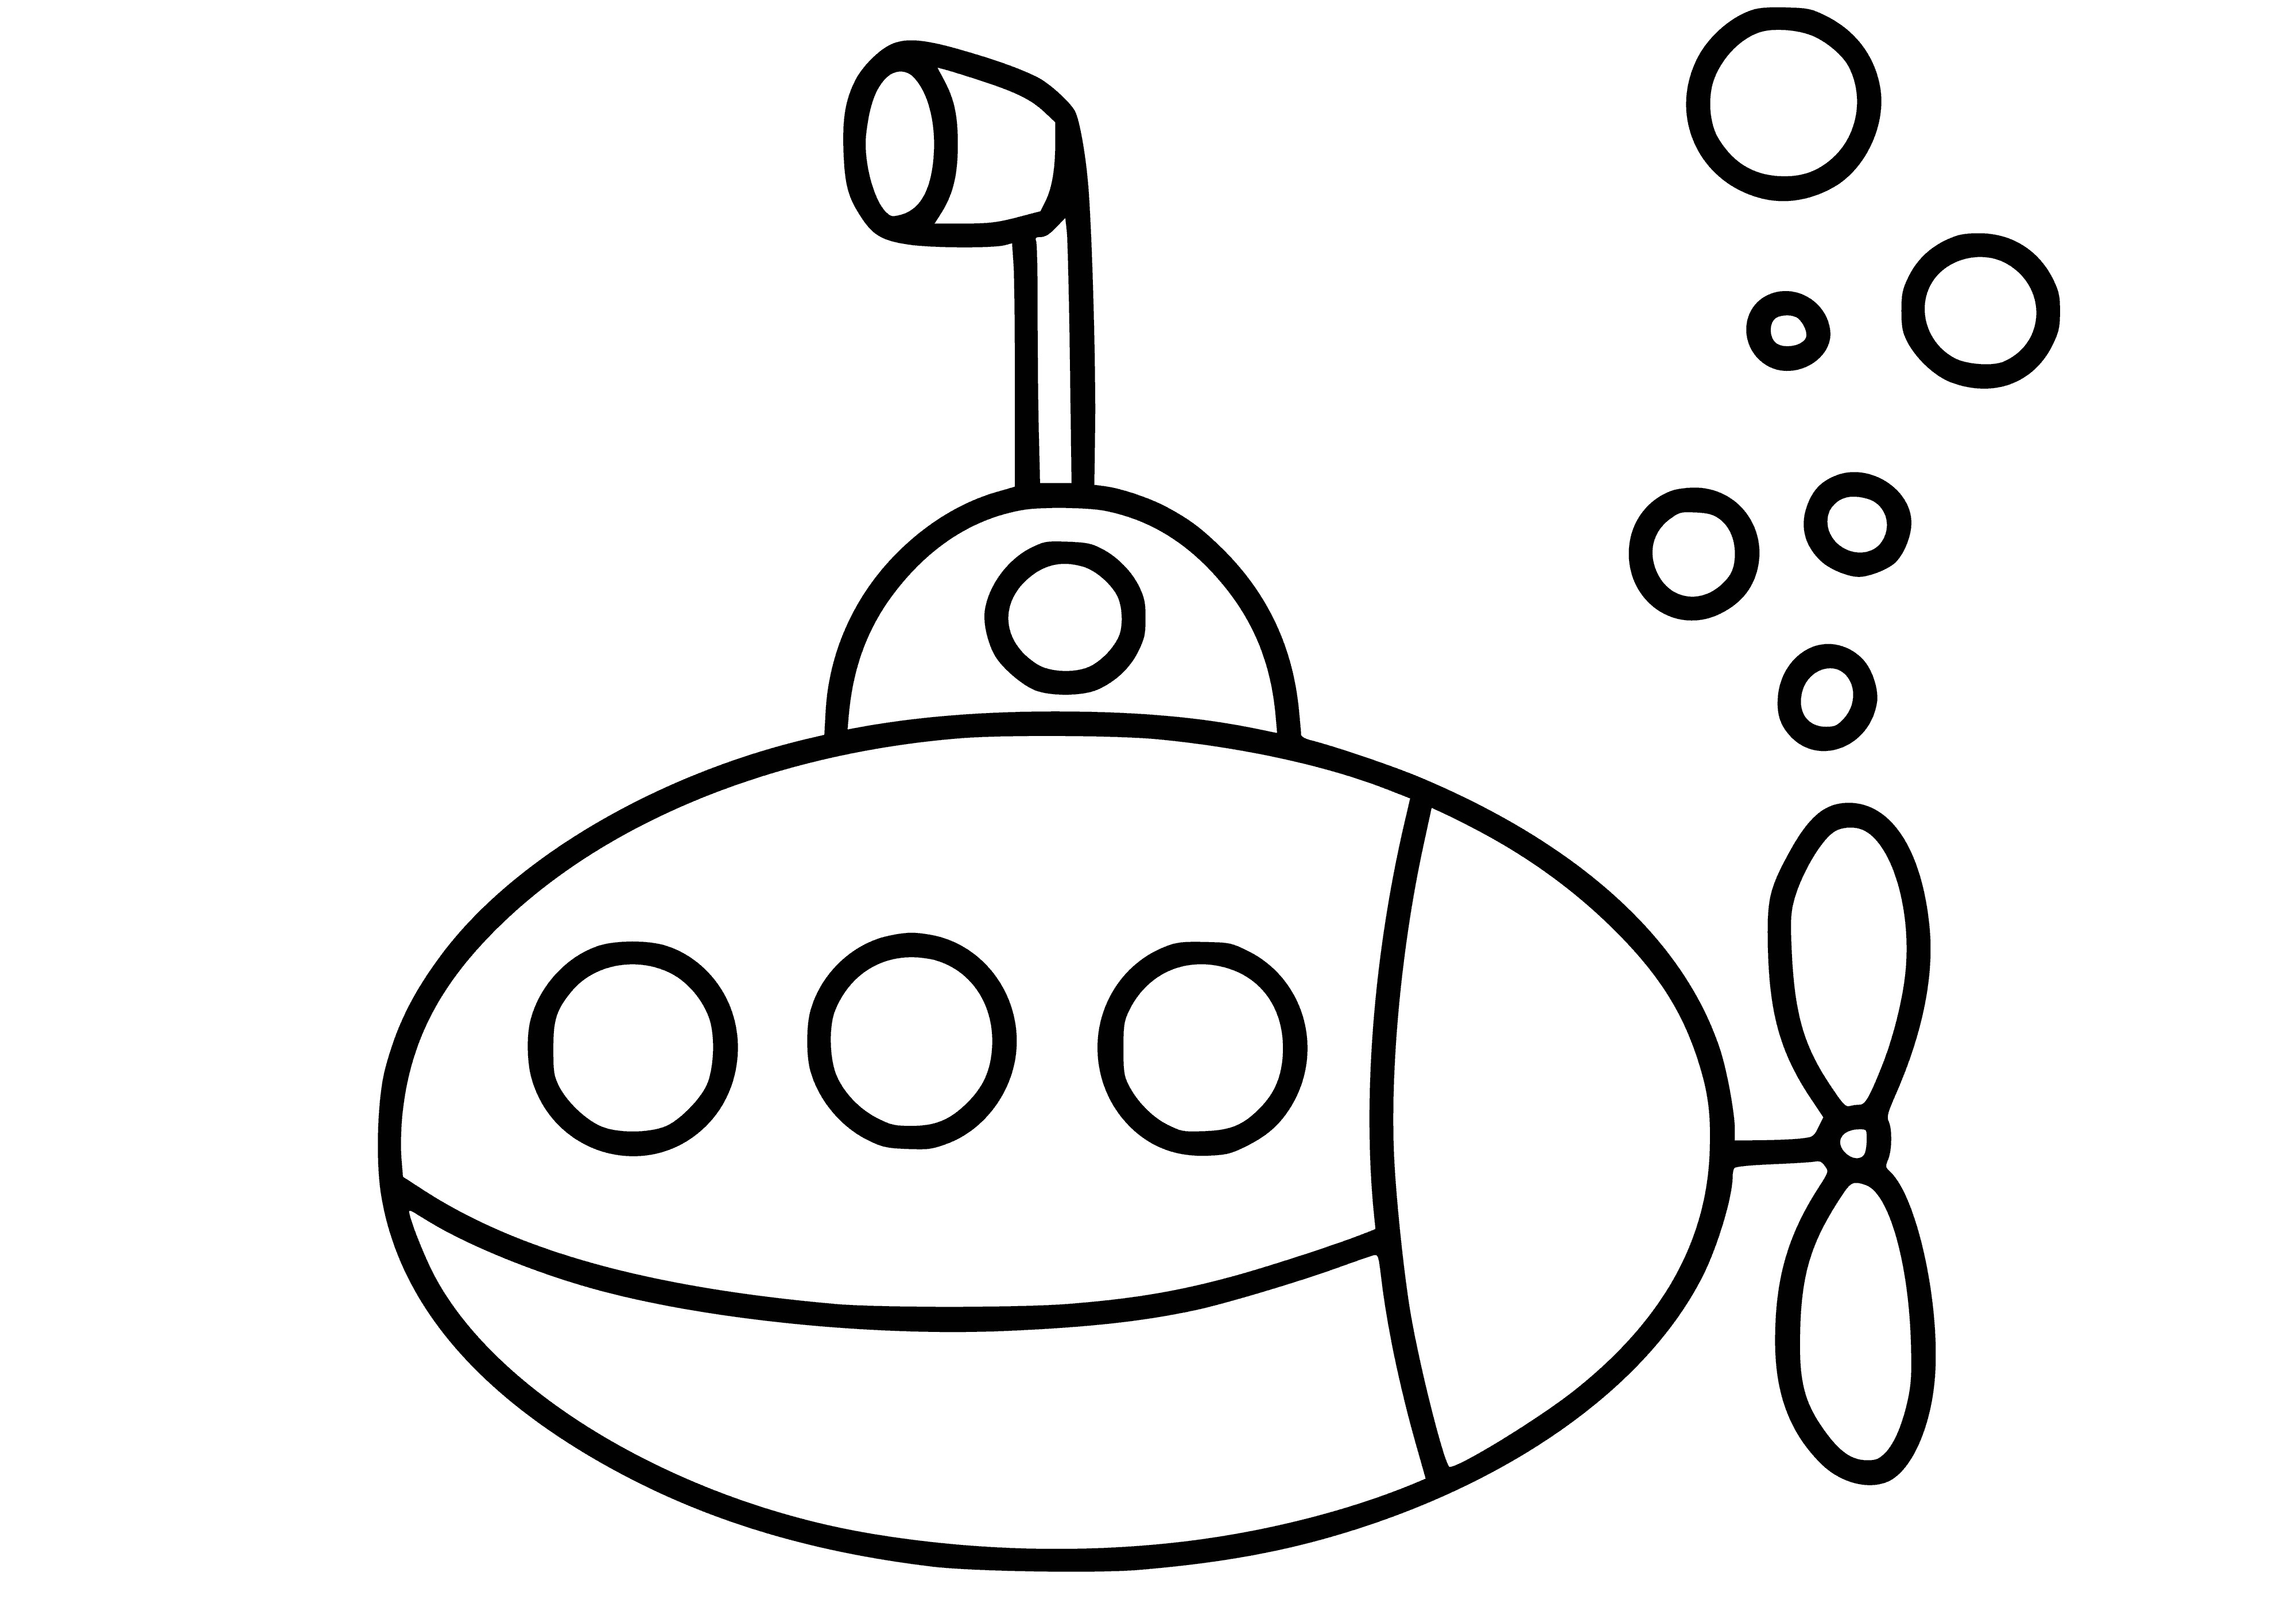 coloring page: Submarine in center surrounded by colorful fish of all sizes. Dark gray sub among blues, greens, yellows, oranges.